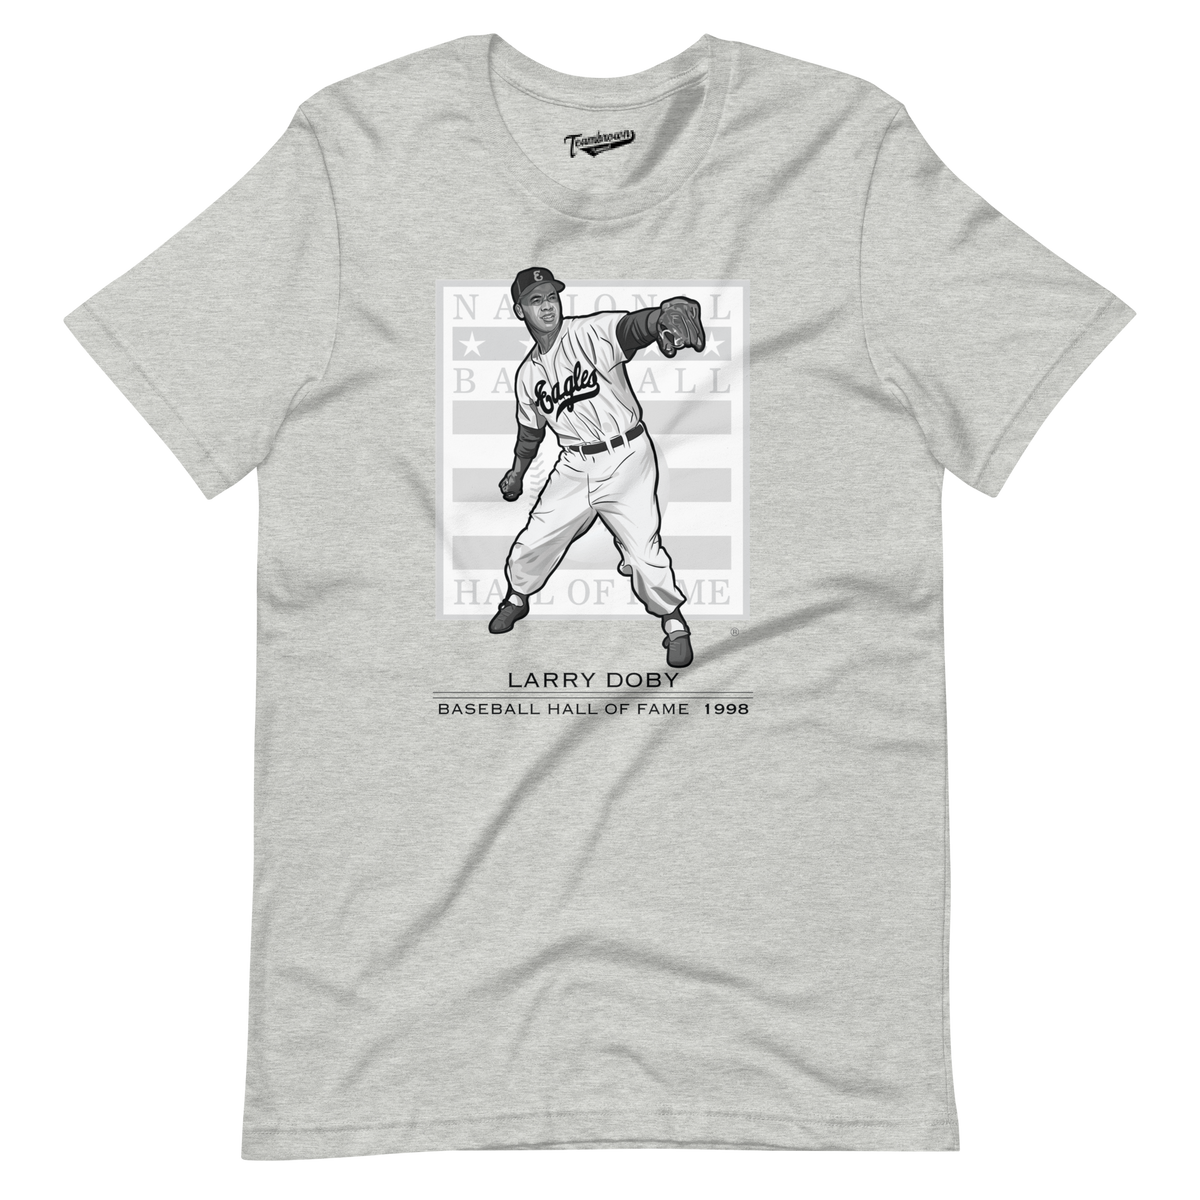 Officially Licensed - National Baseball Hall of Fame and Museum George Brett T-Shirt | Black NBHOF Shirt | Teambrown Apparel True Royal / Adult S / T-Shirt